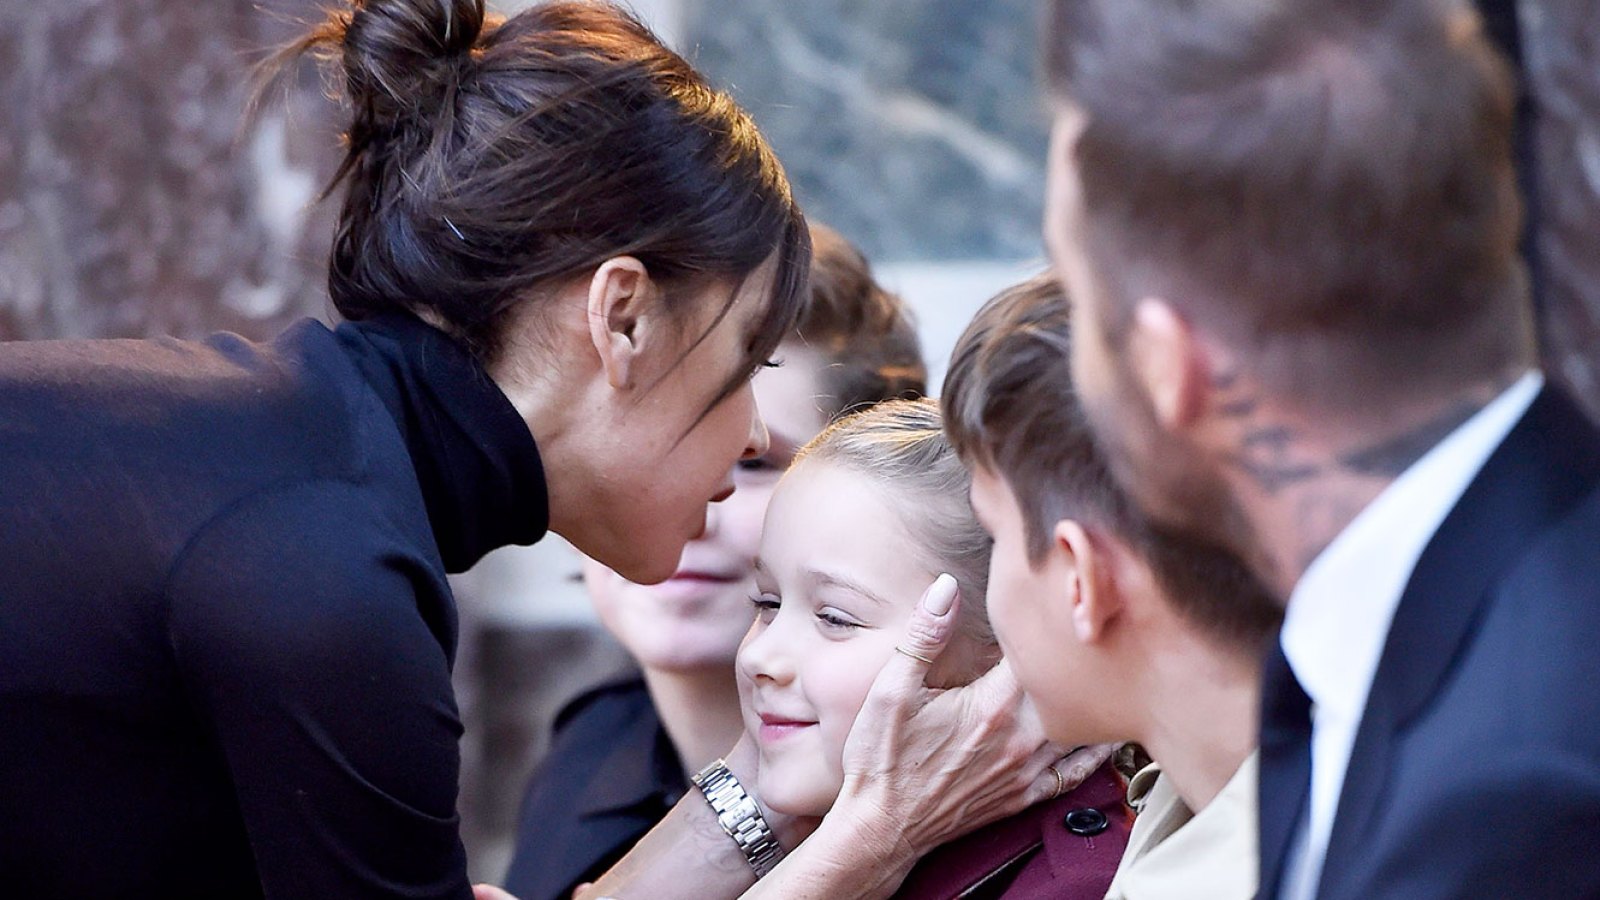 7-Year-Old Harper Beckham Gets a Clean Product Facial From Dr. Barbara Sturm